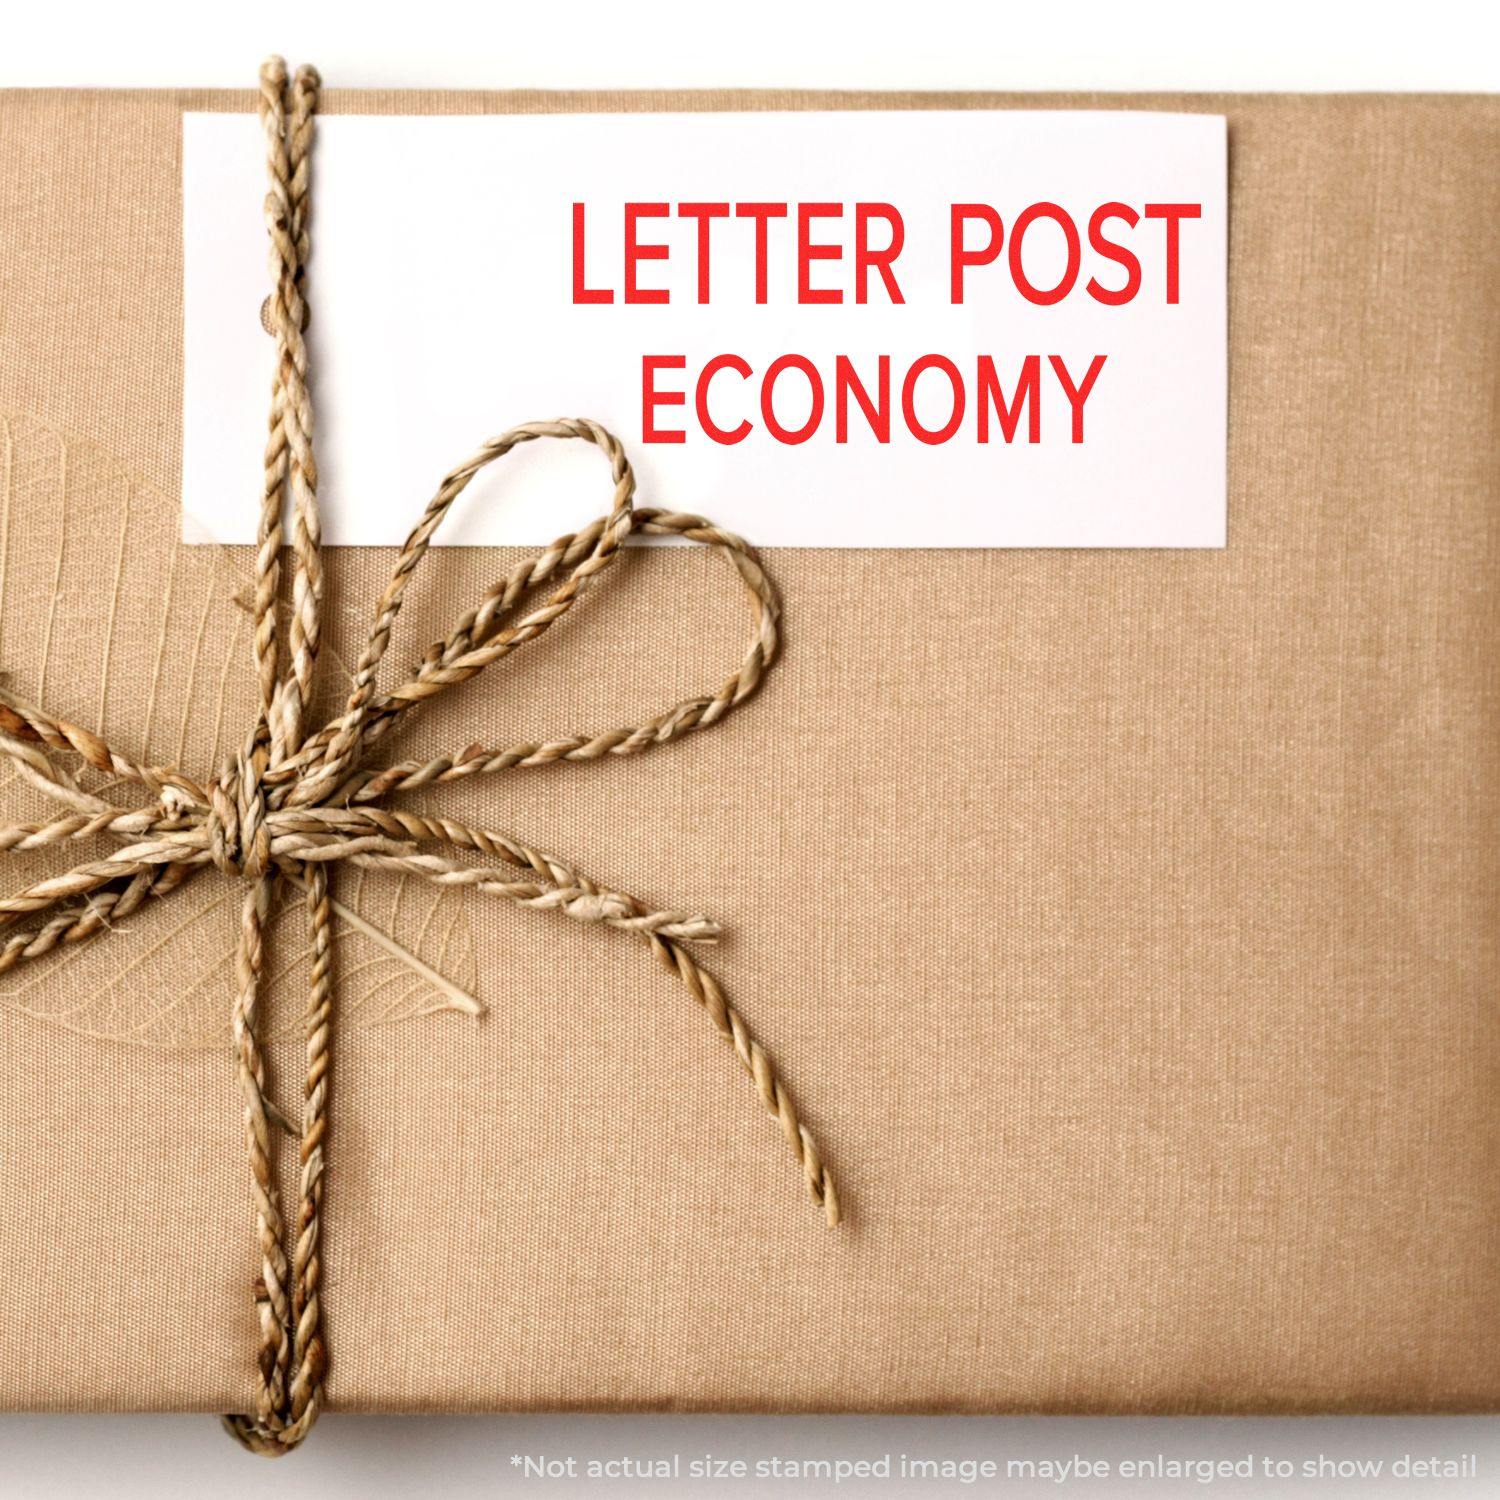 A stock office pre-inked stamp with a stamped image showing how the text "LETTER POST ECONOMY" is displayed after stamping.